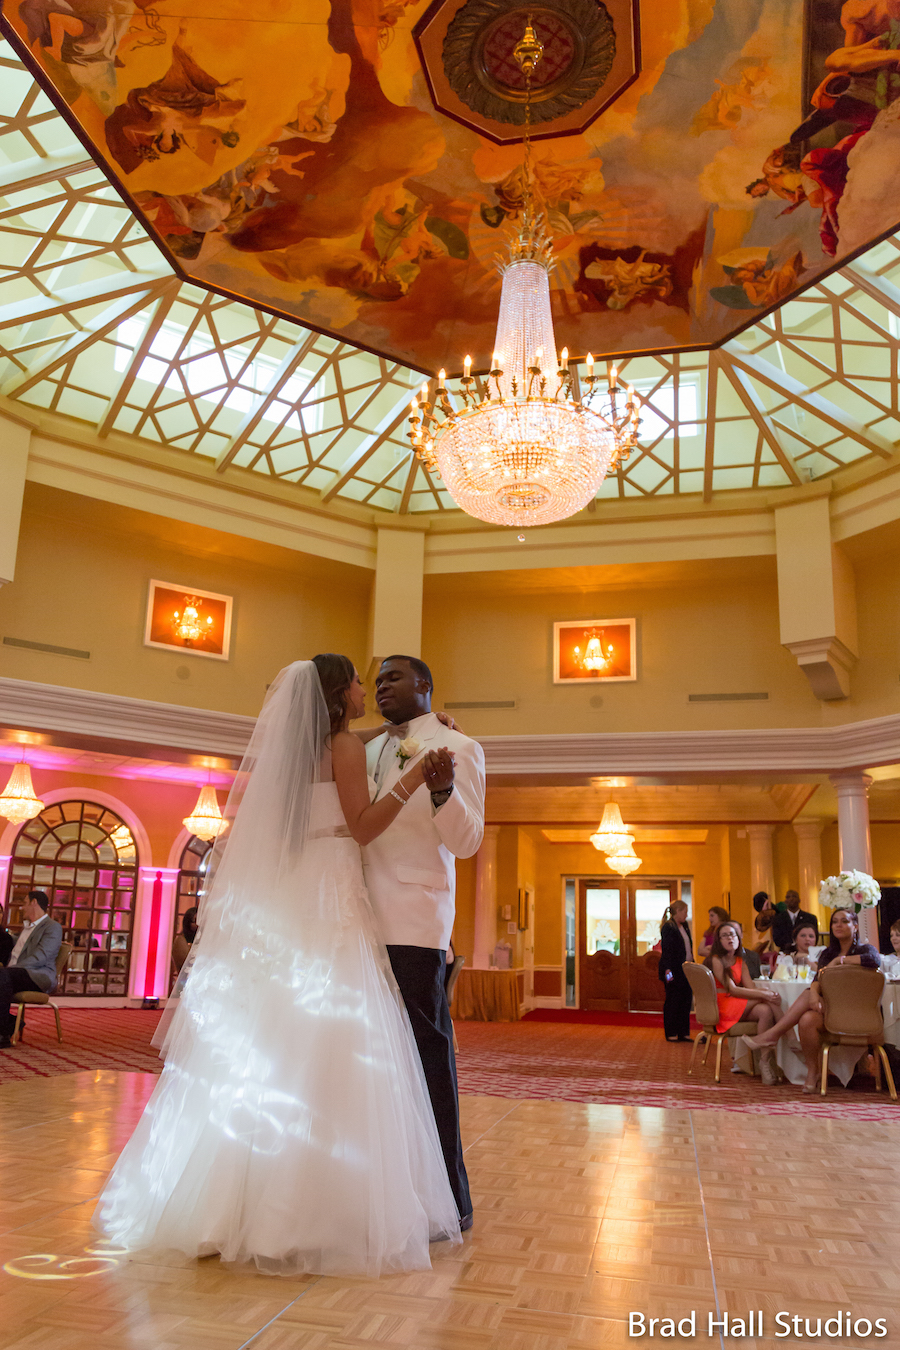 Tampa Bay Bride and Groom First Dance at Wedding Reception | St. Petersburg Wedding DJ and Entertainment Celebrations24